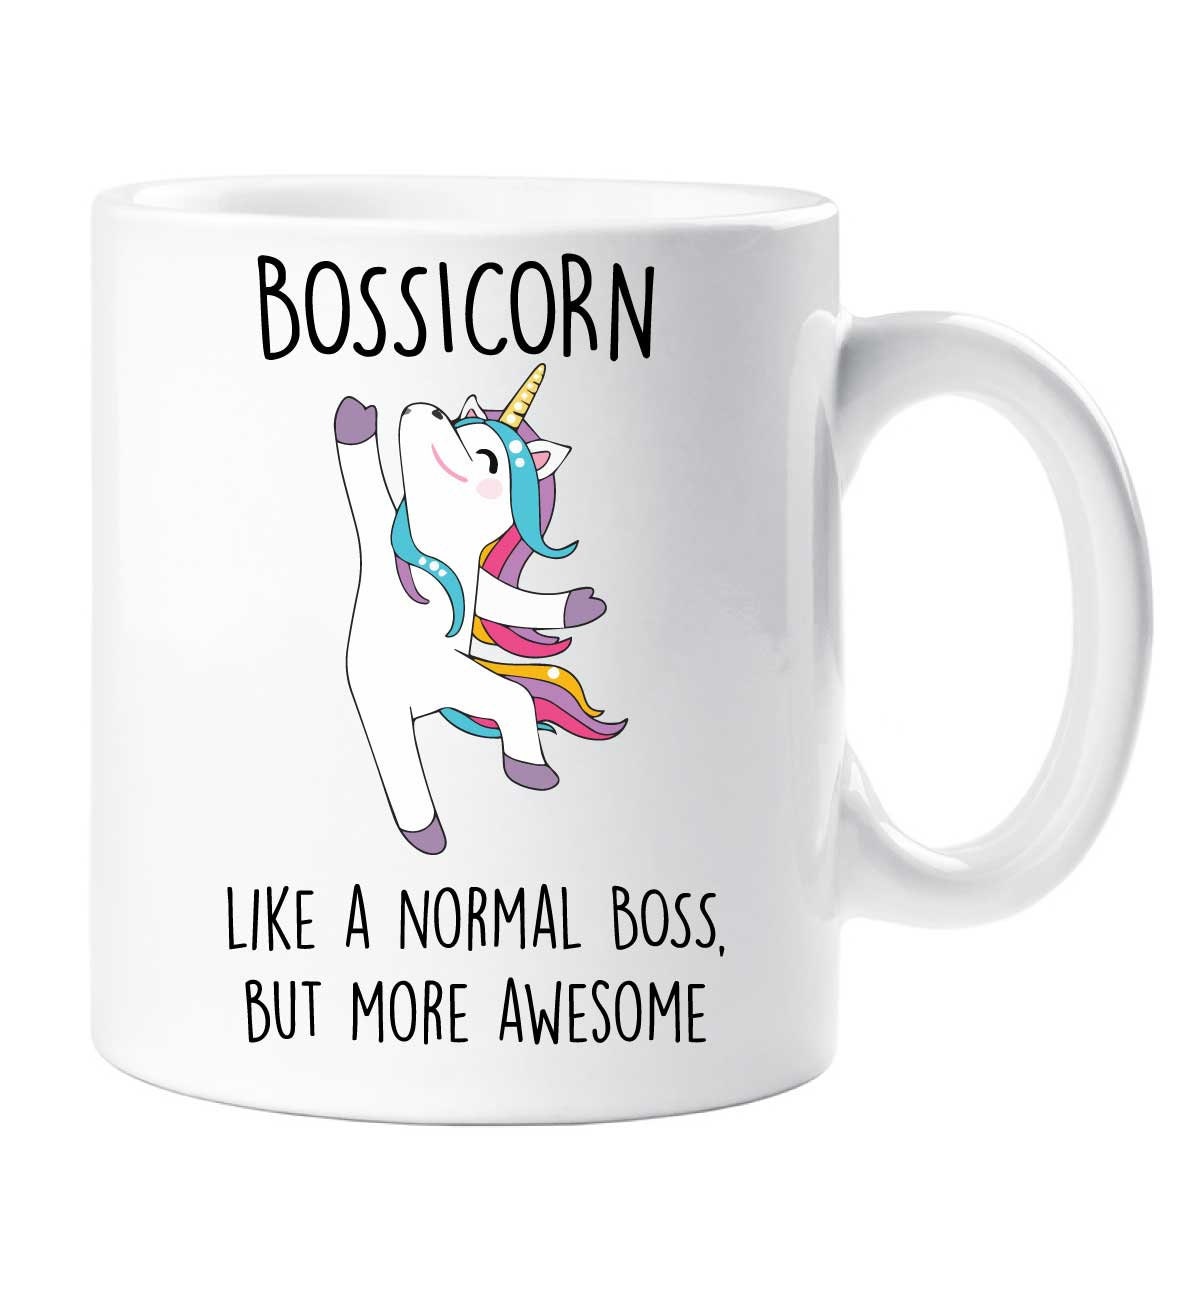 Bossicorn Mug Like A Normal Boss but More Awesome Funny Porn Photo